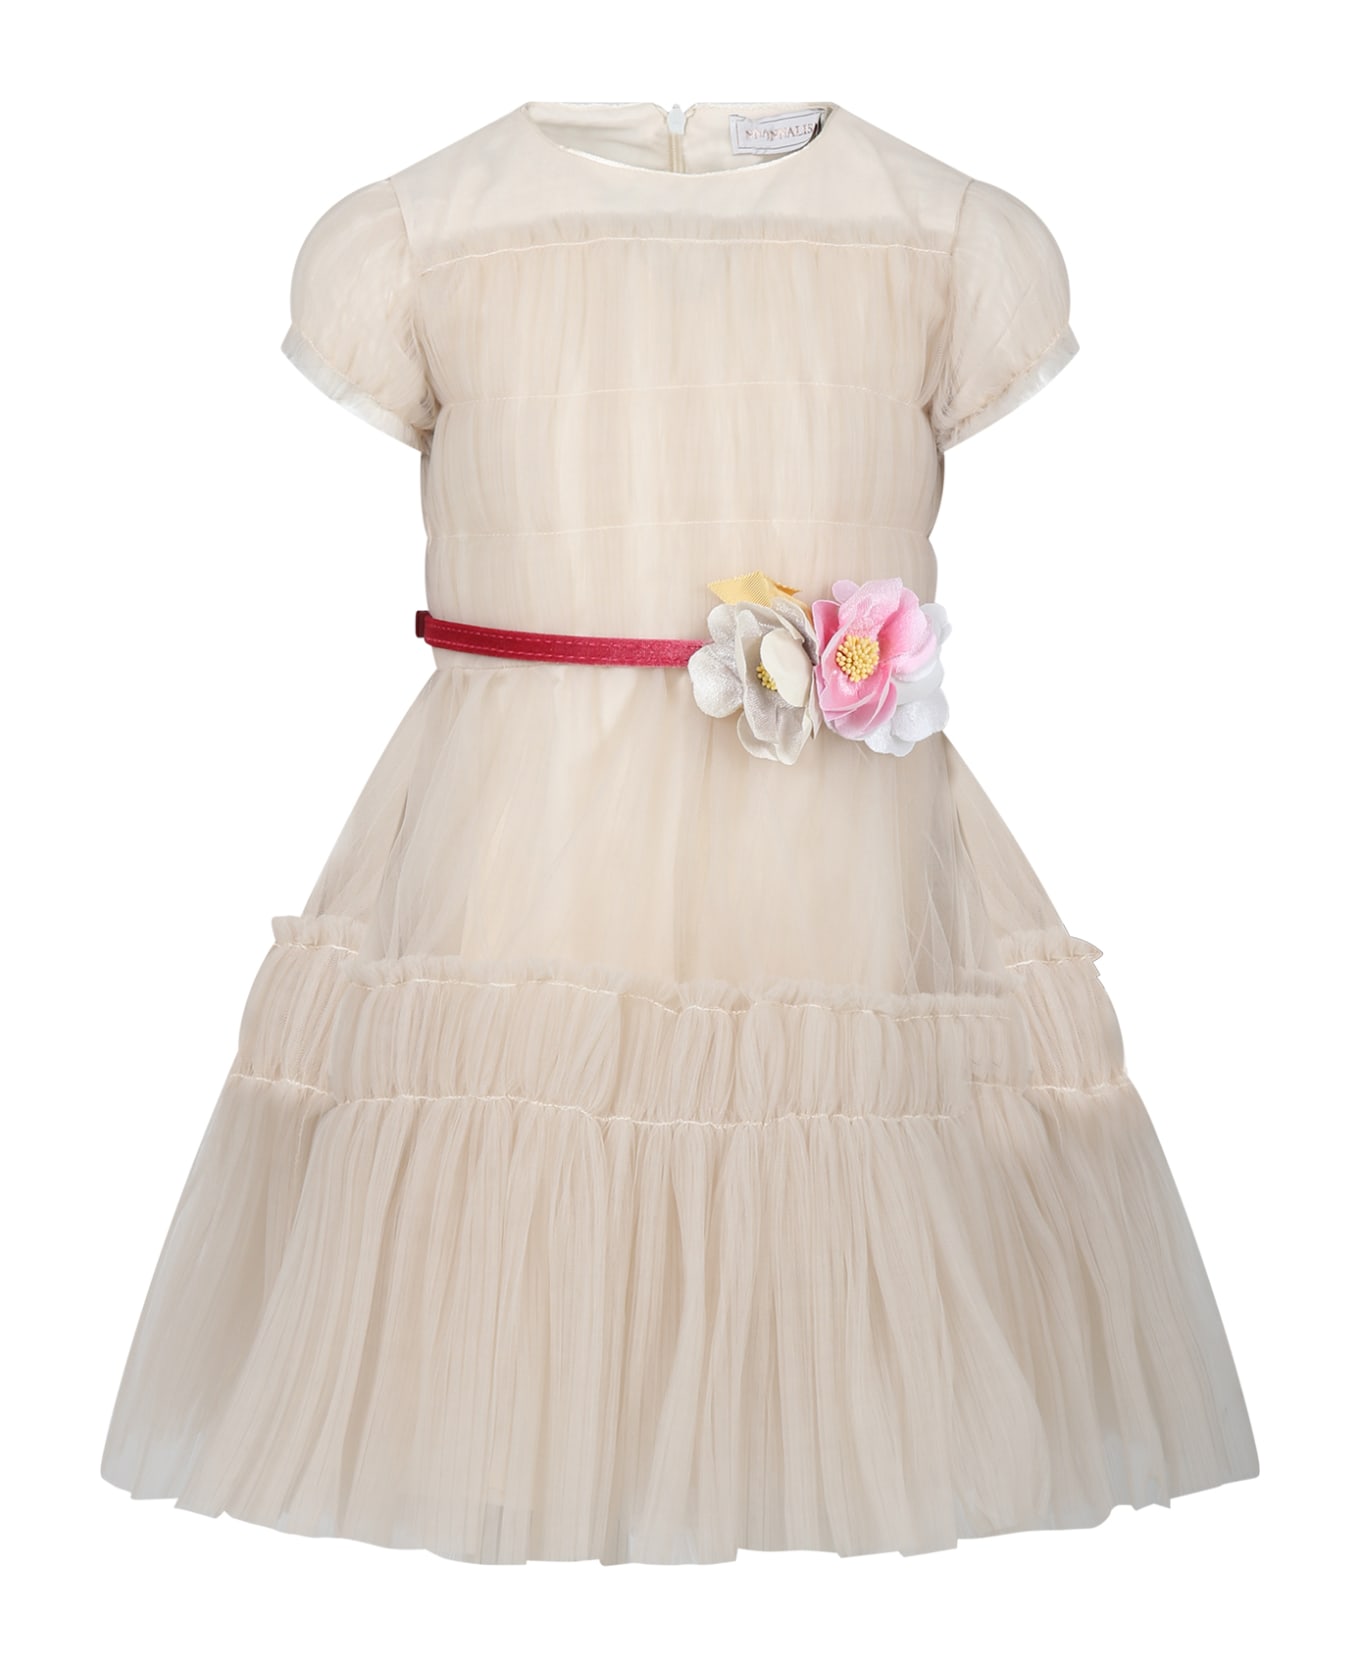 Monnalisa Ivory Dress For Girl With Flowers - Ivory ワンピース＆ドレス